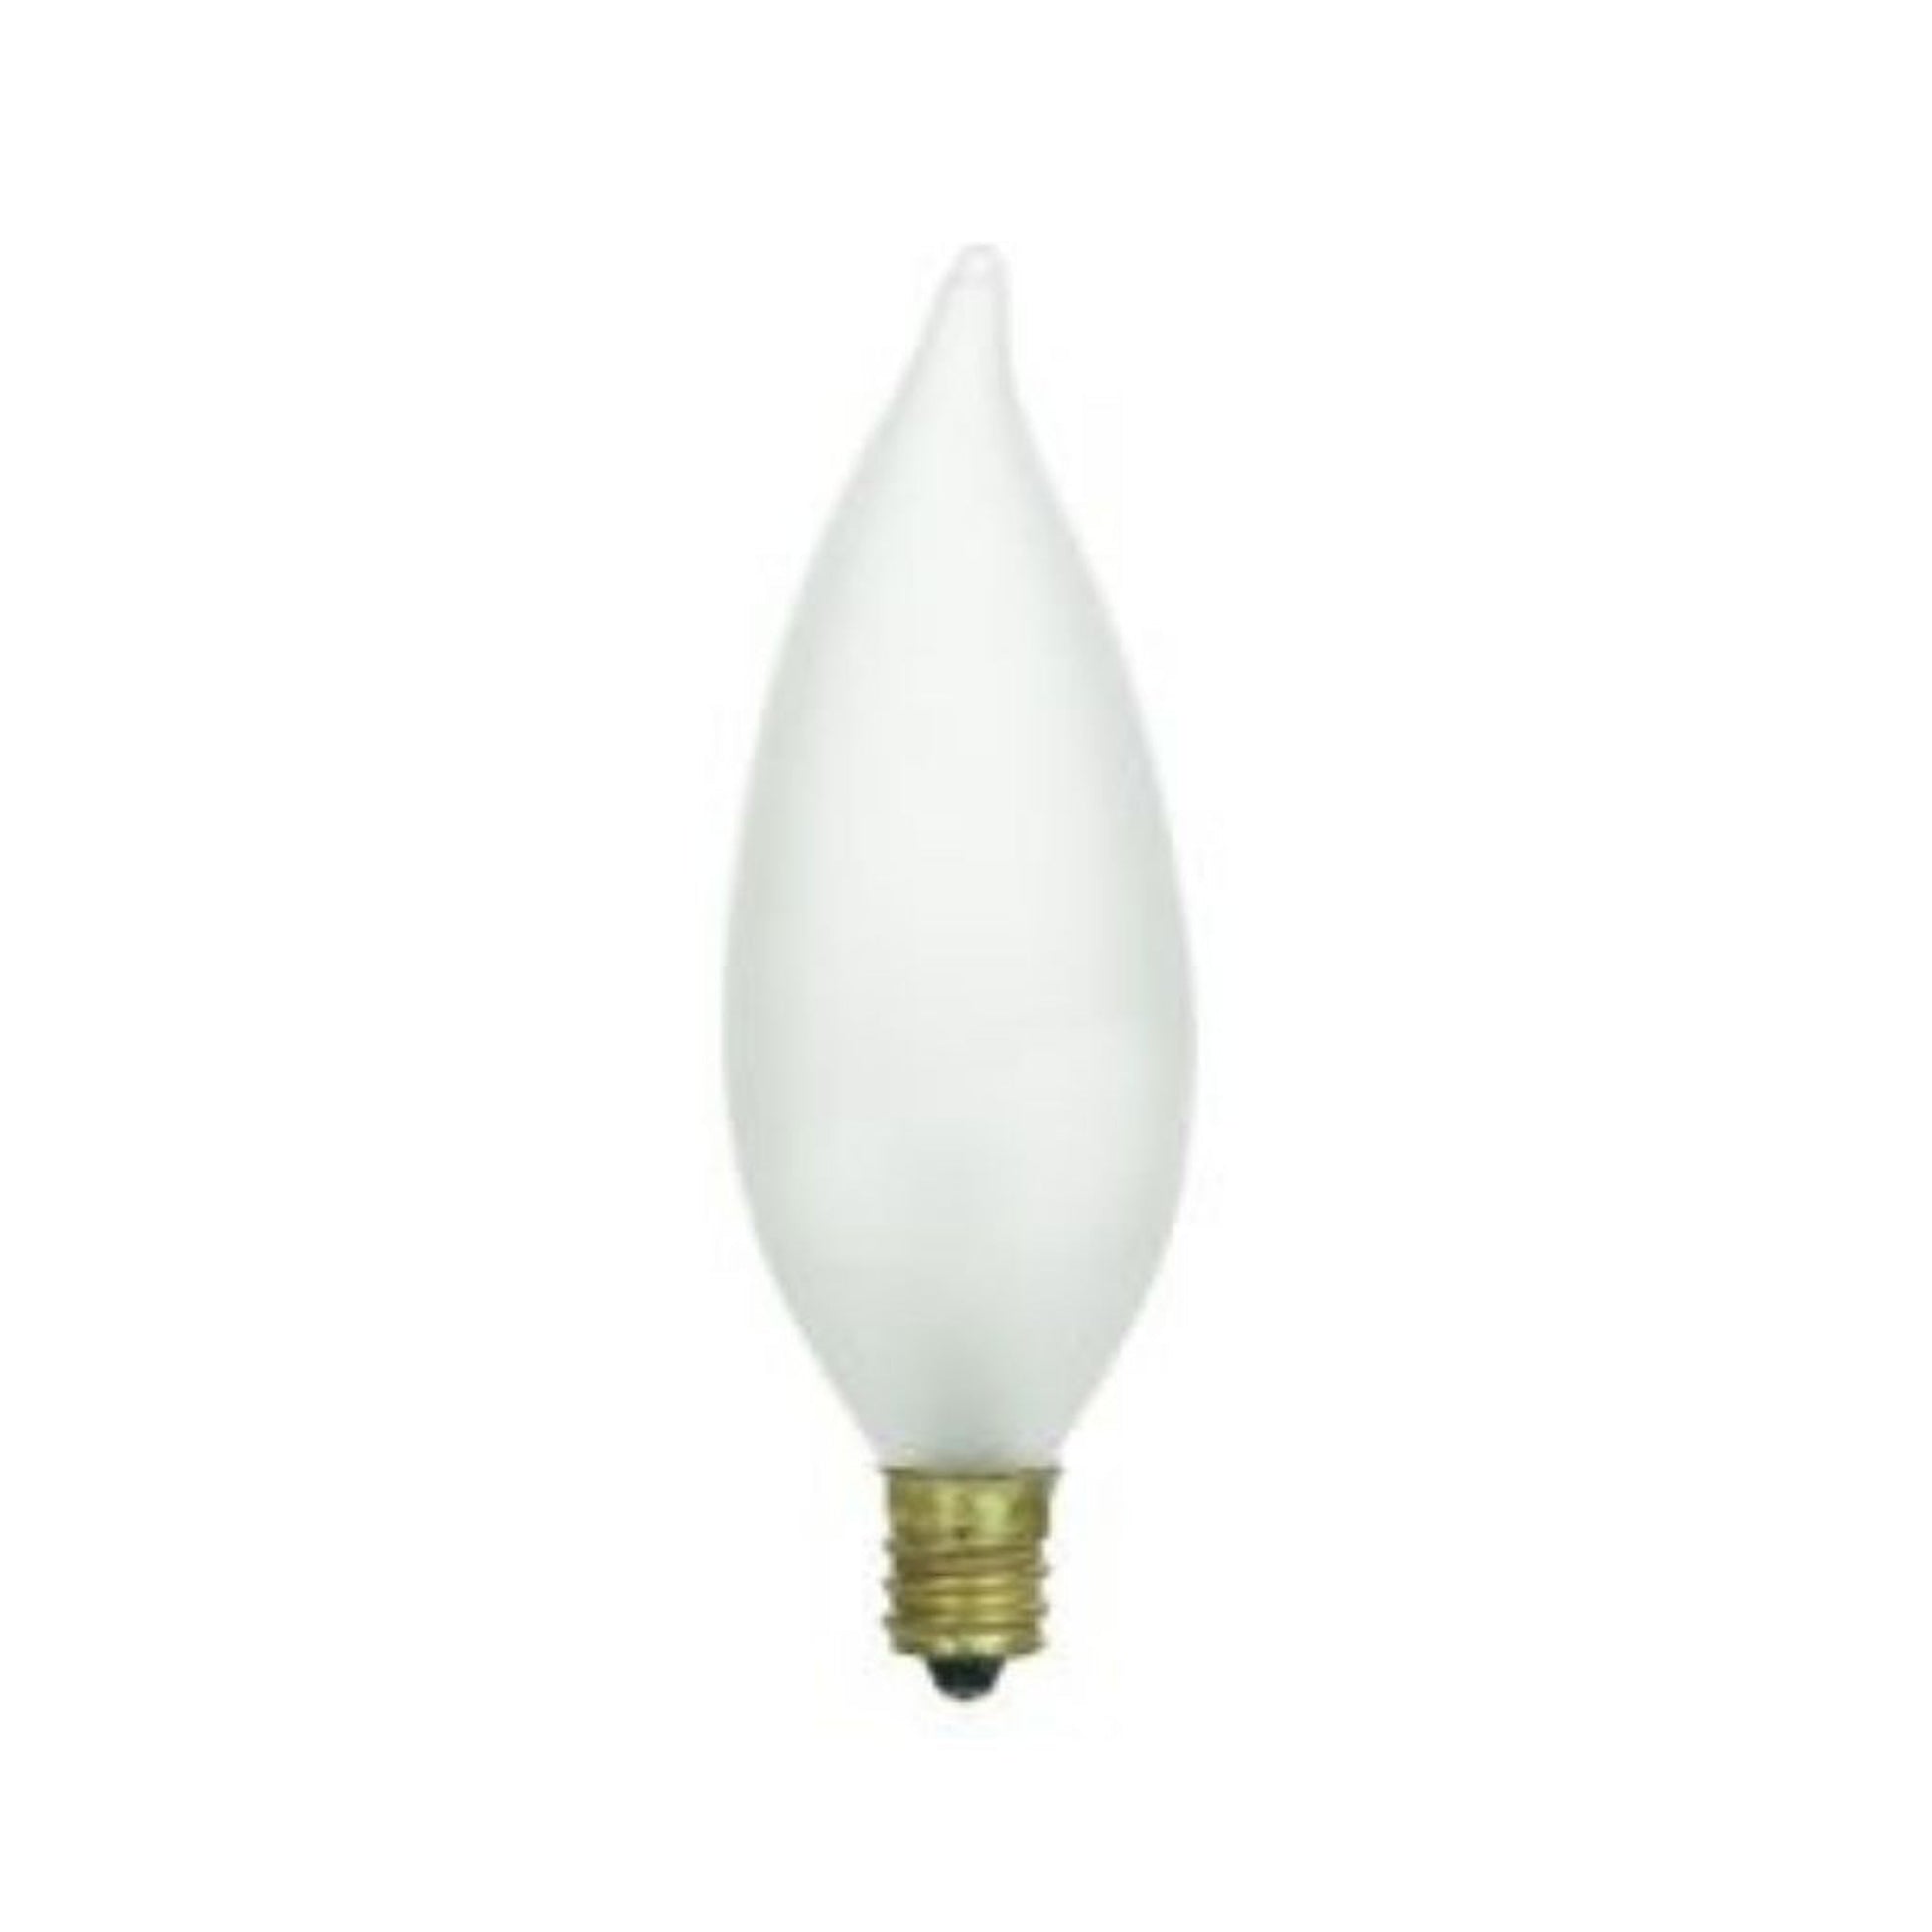 Craftmade 4-Watt Candle-Style With Flame Tip, Frosted Finish, E12 Candelabra Base, 4.4" M.O.L., 2700K Warm White LED Light Bulb